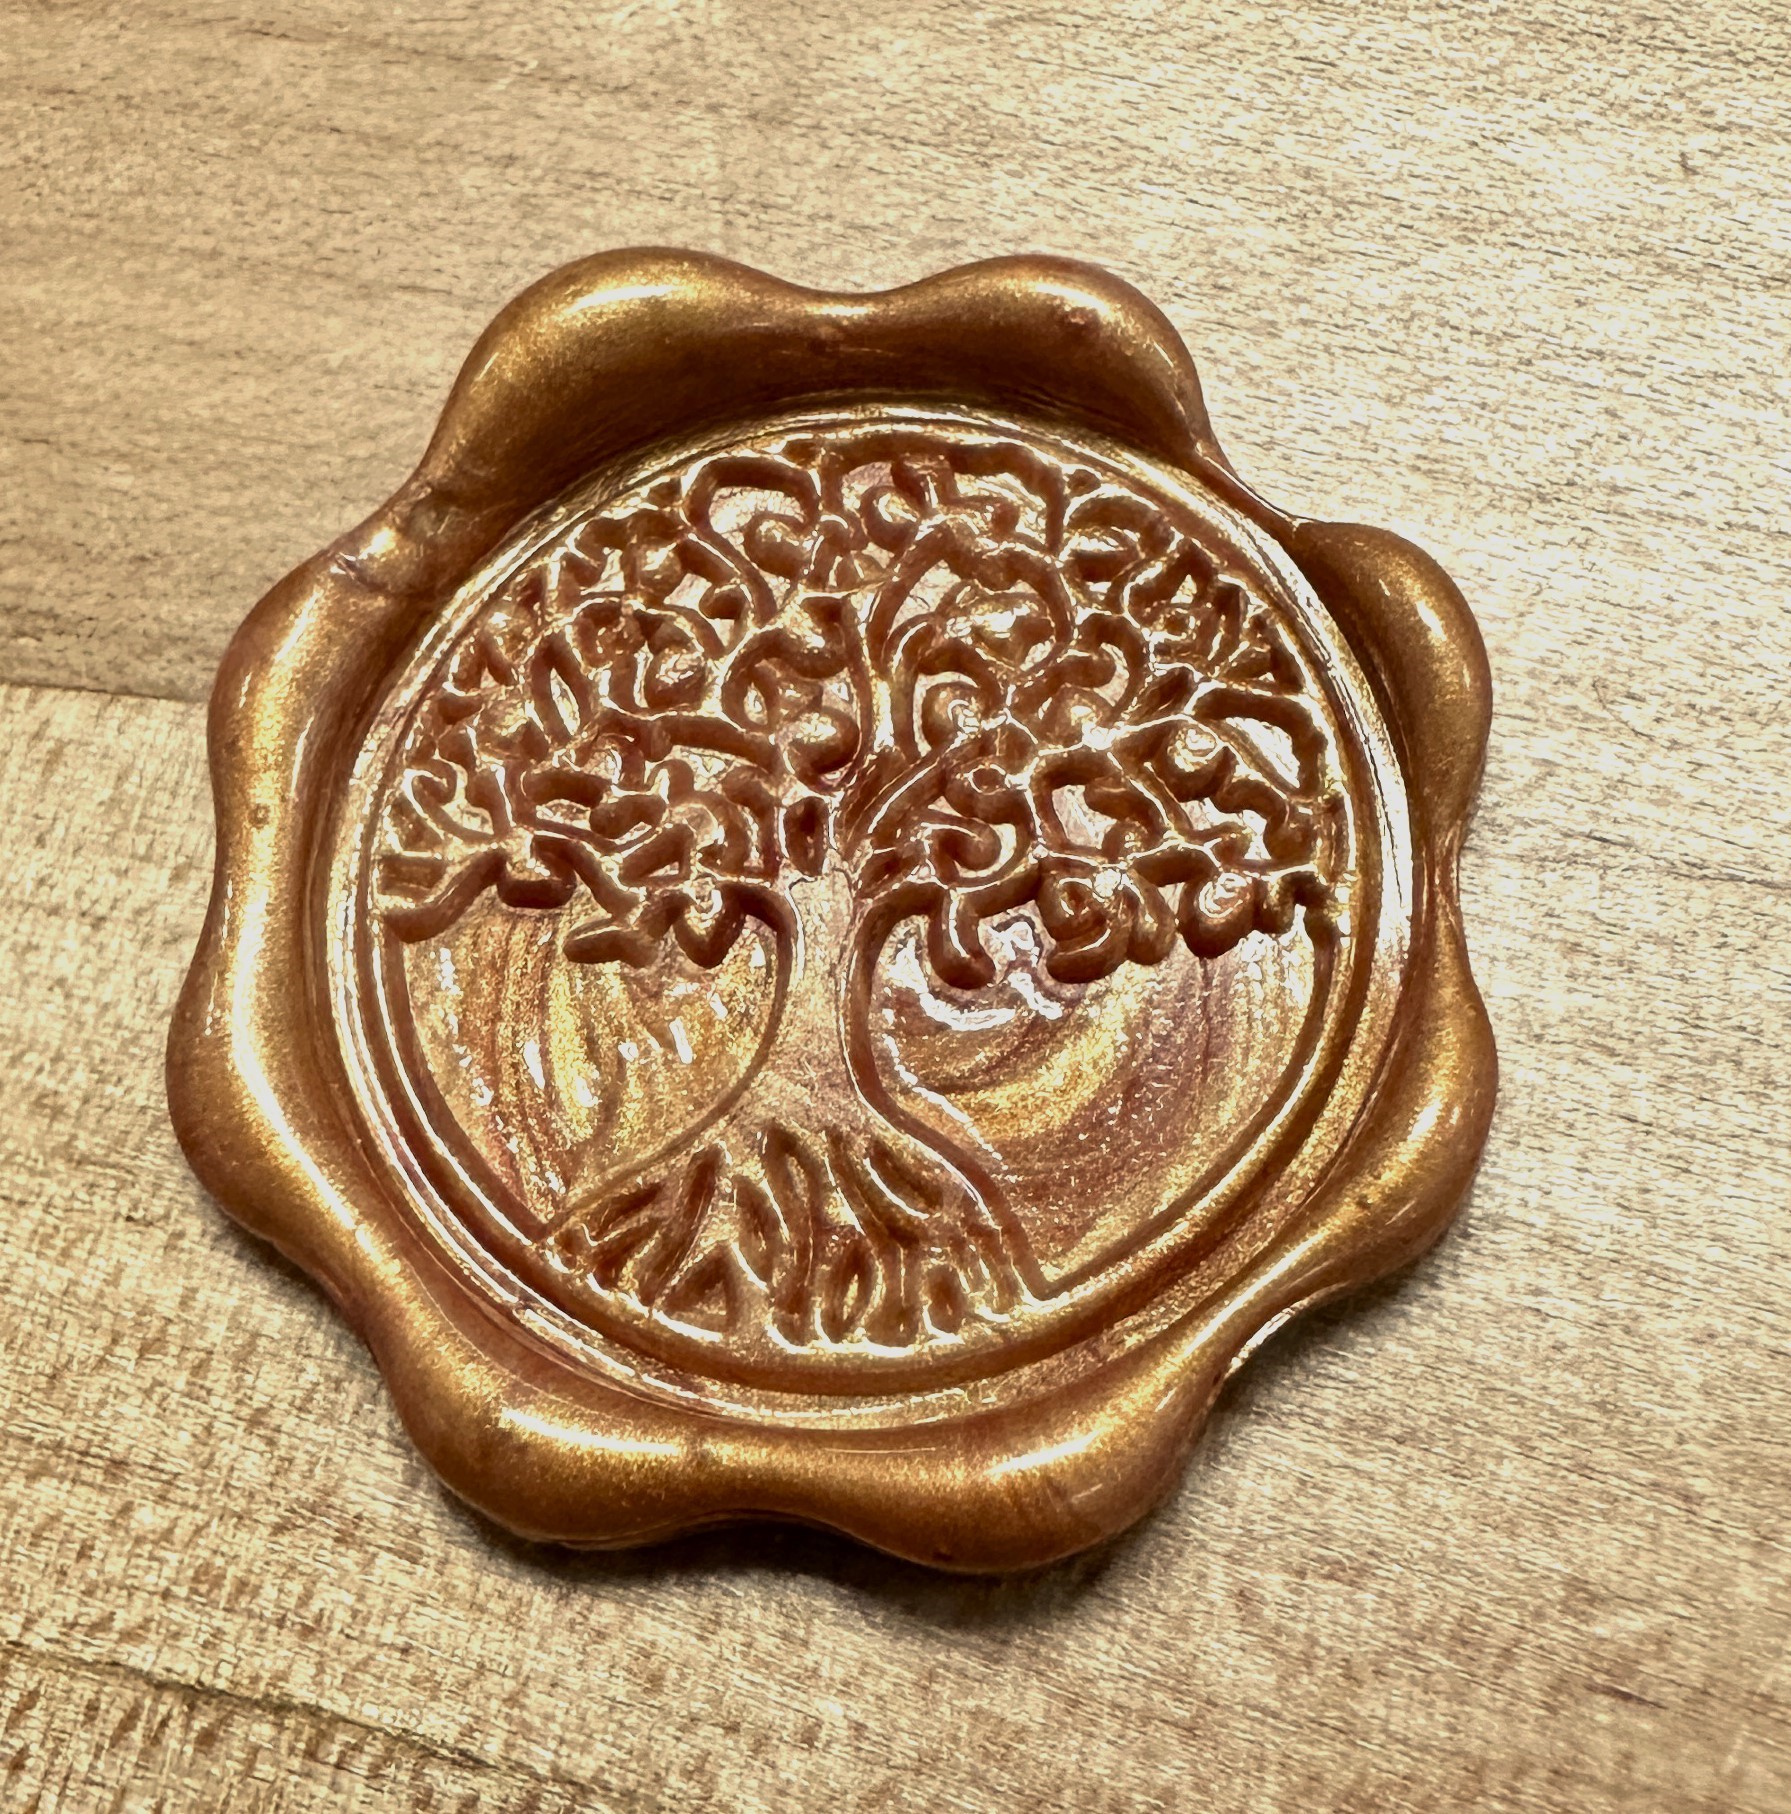 A close up of a completed wax stamp in the shape of a tree.